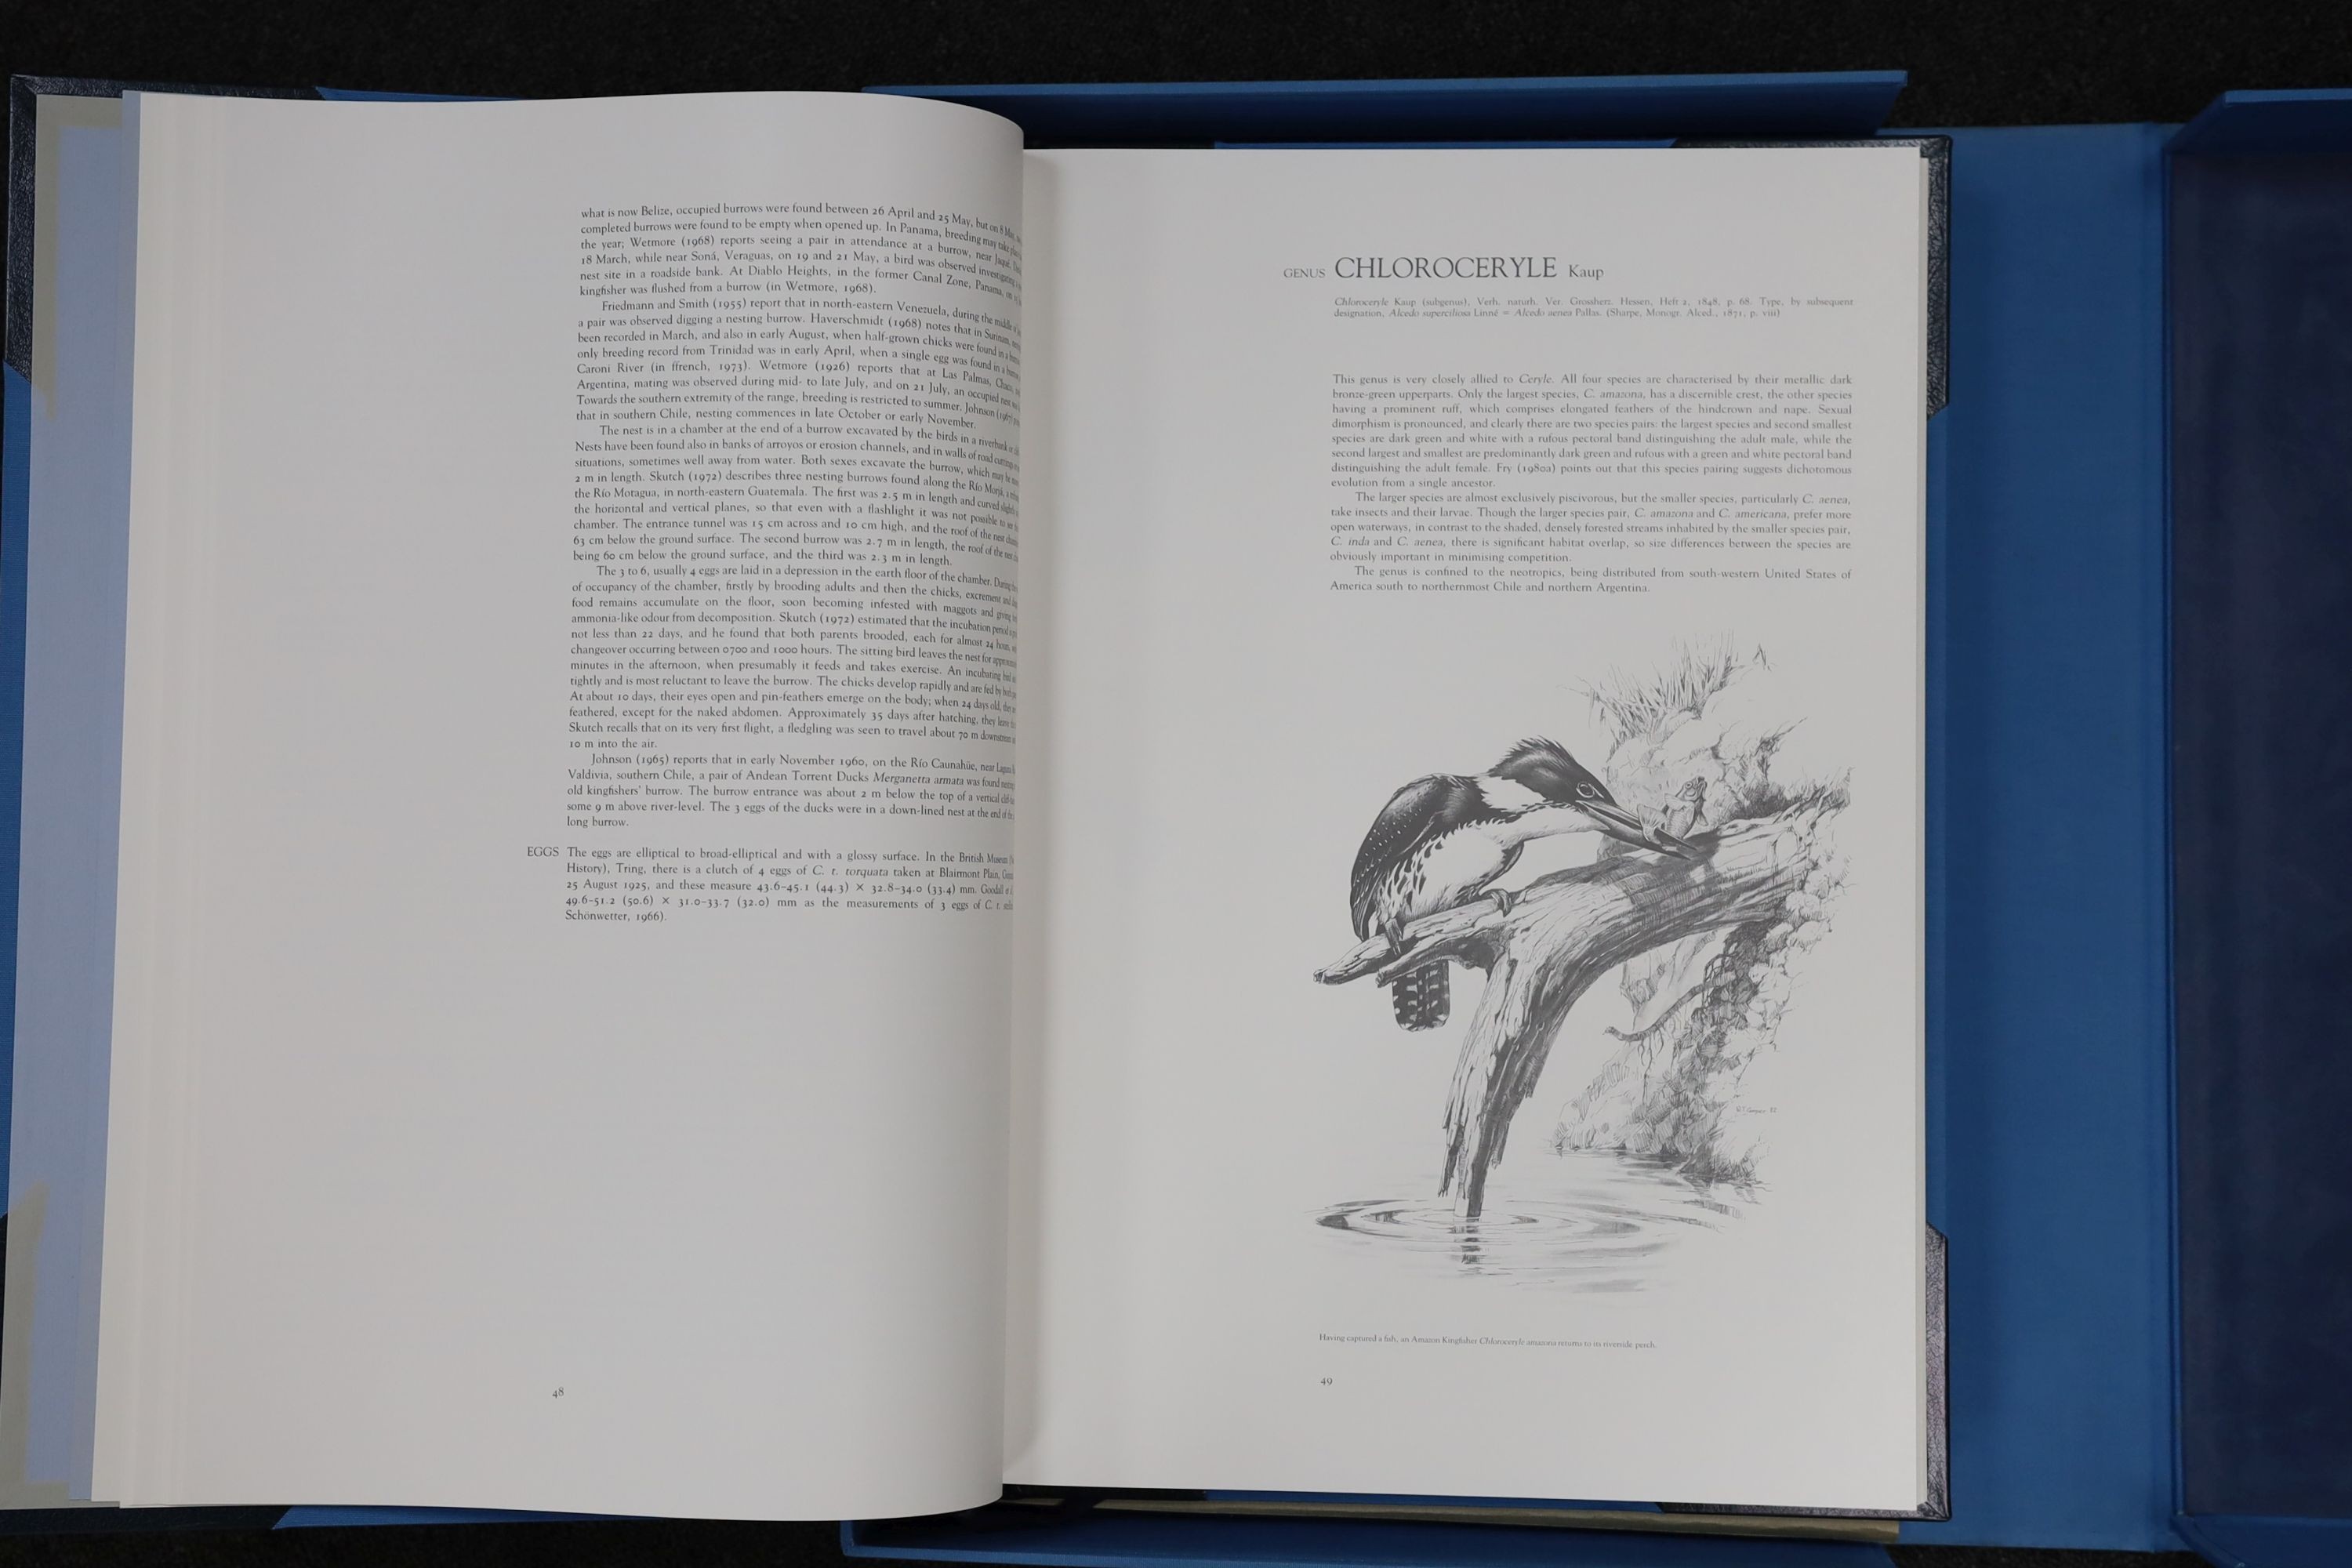 Forshaw, Joseph M. - Kingfishers and Related Birds - Part 1 (Vols 1 & 2): Aeliniidae, one of 1000 signed, numbered copies, illustrated with 52 colour plates by William B. Cooper, together with maps, folio, half morocco,